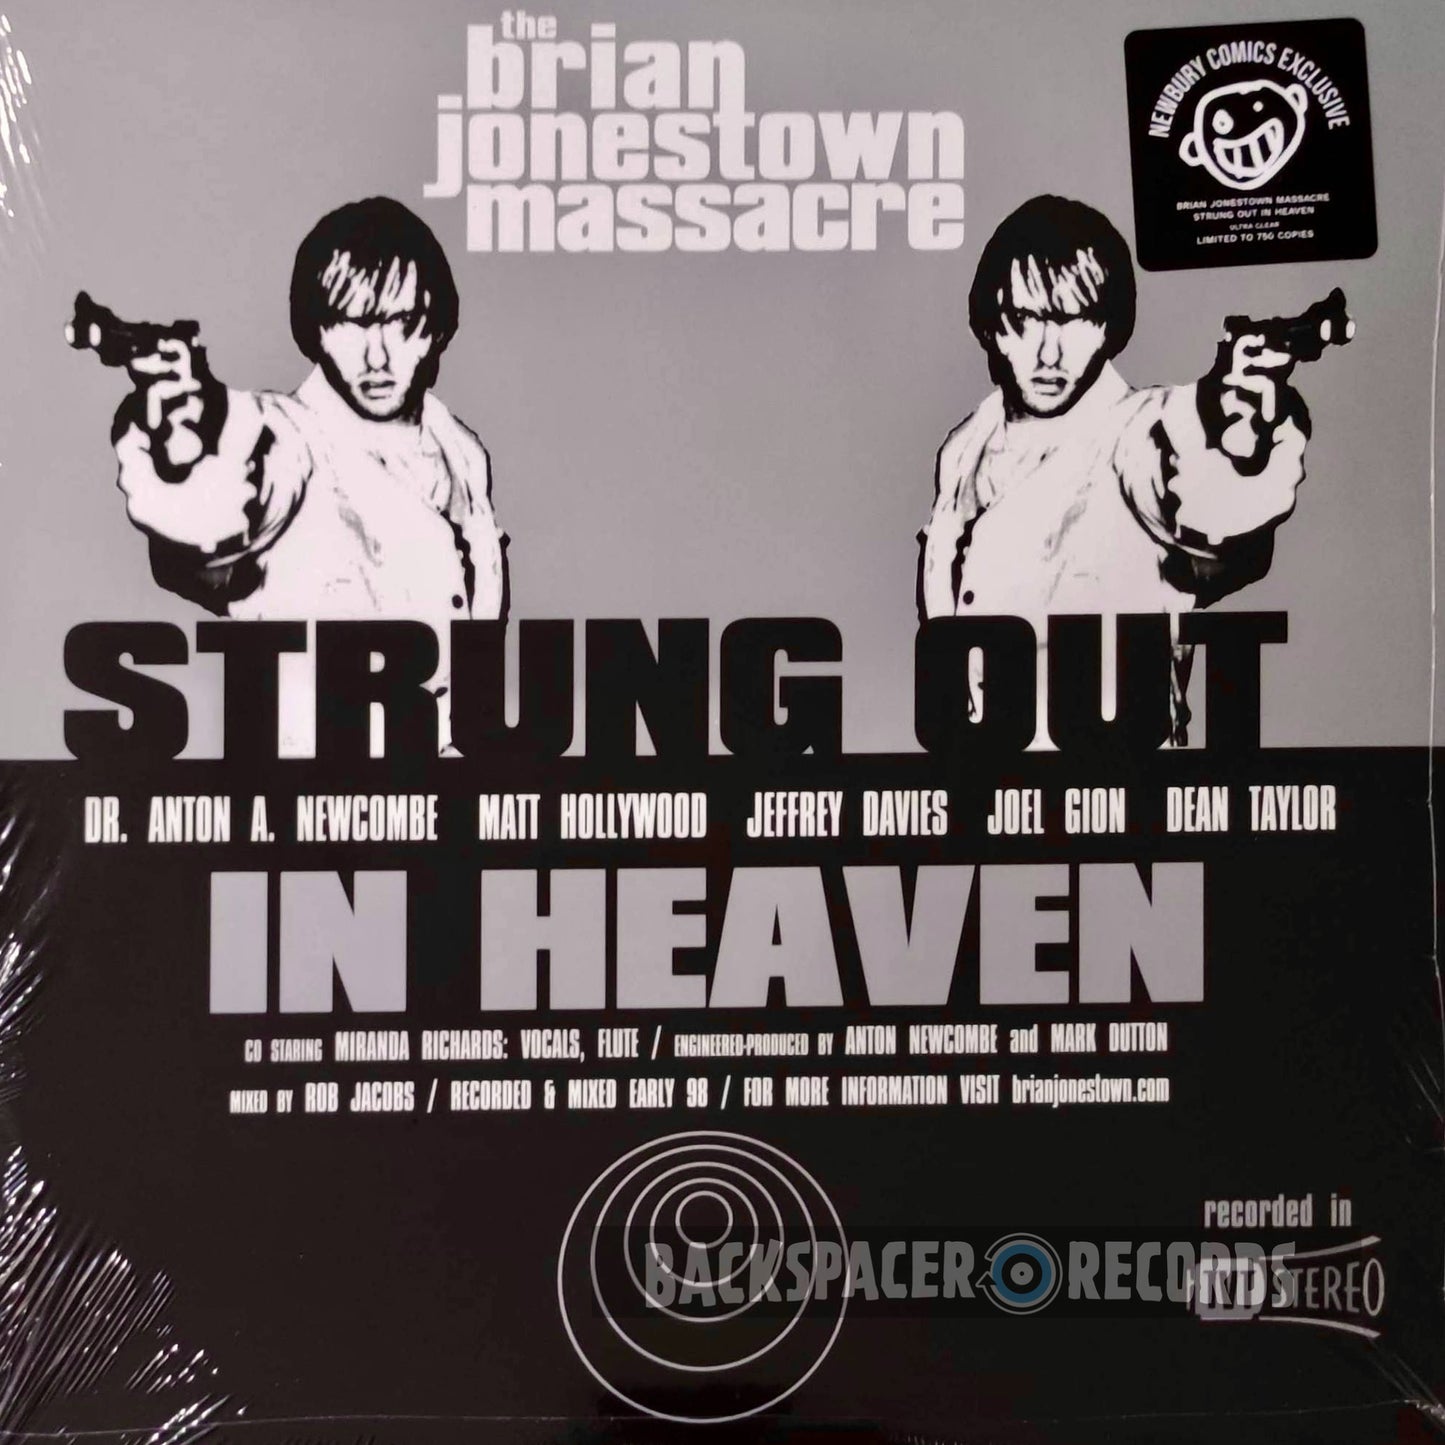 The Brian Jonestown Massacre – Strung Out In Heaven (Limited Edition) LP (Sealed)